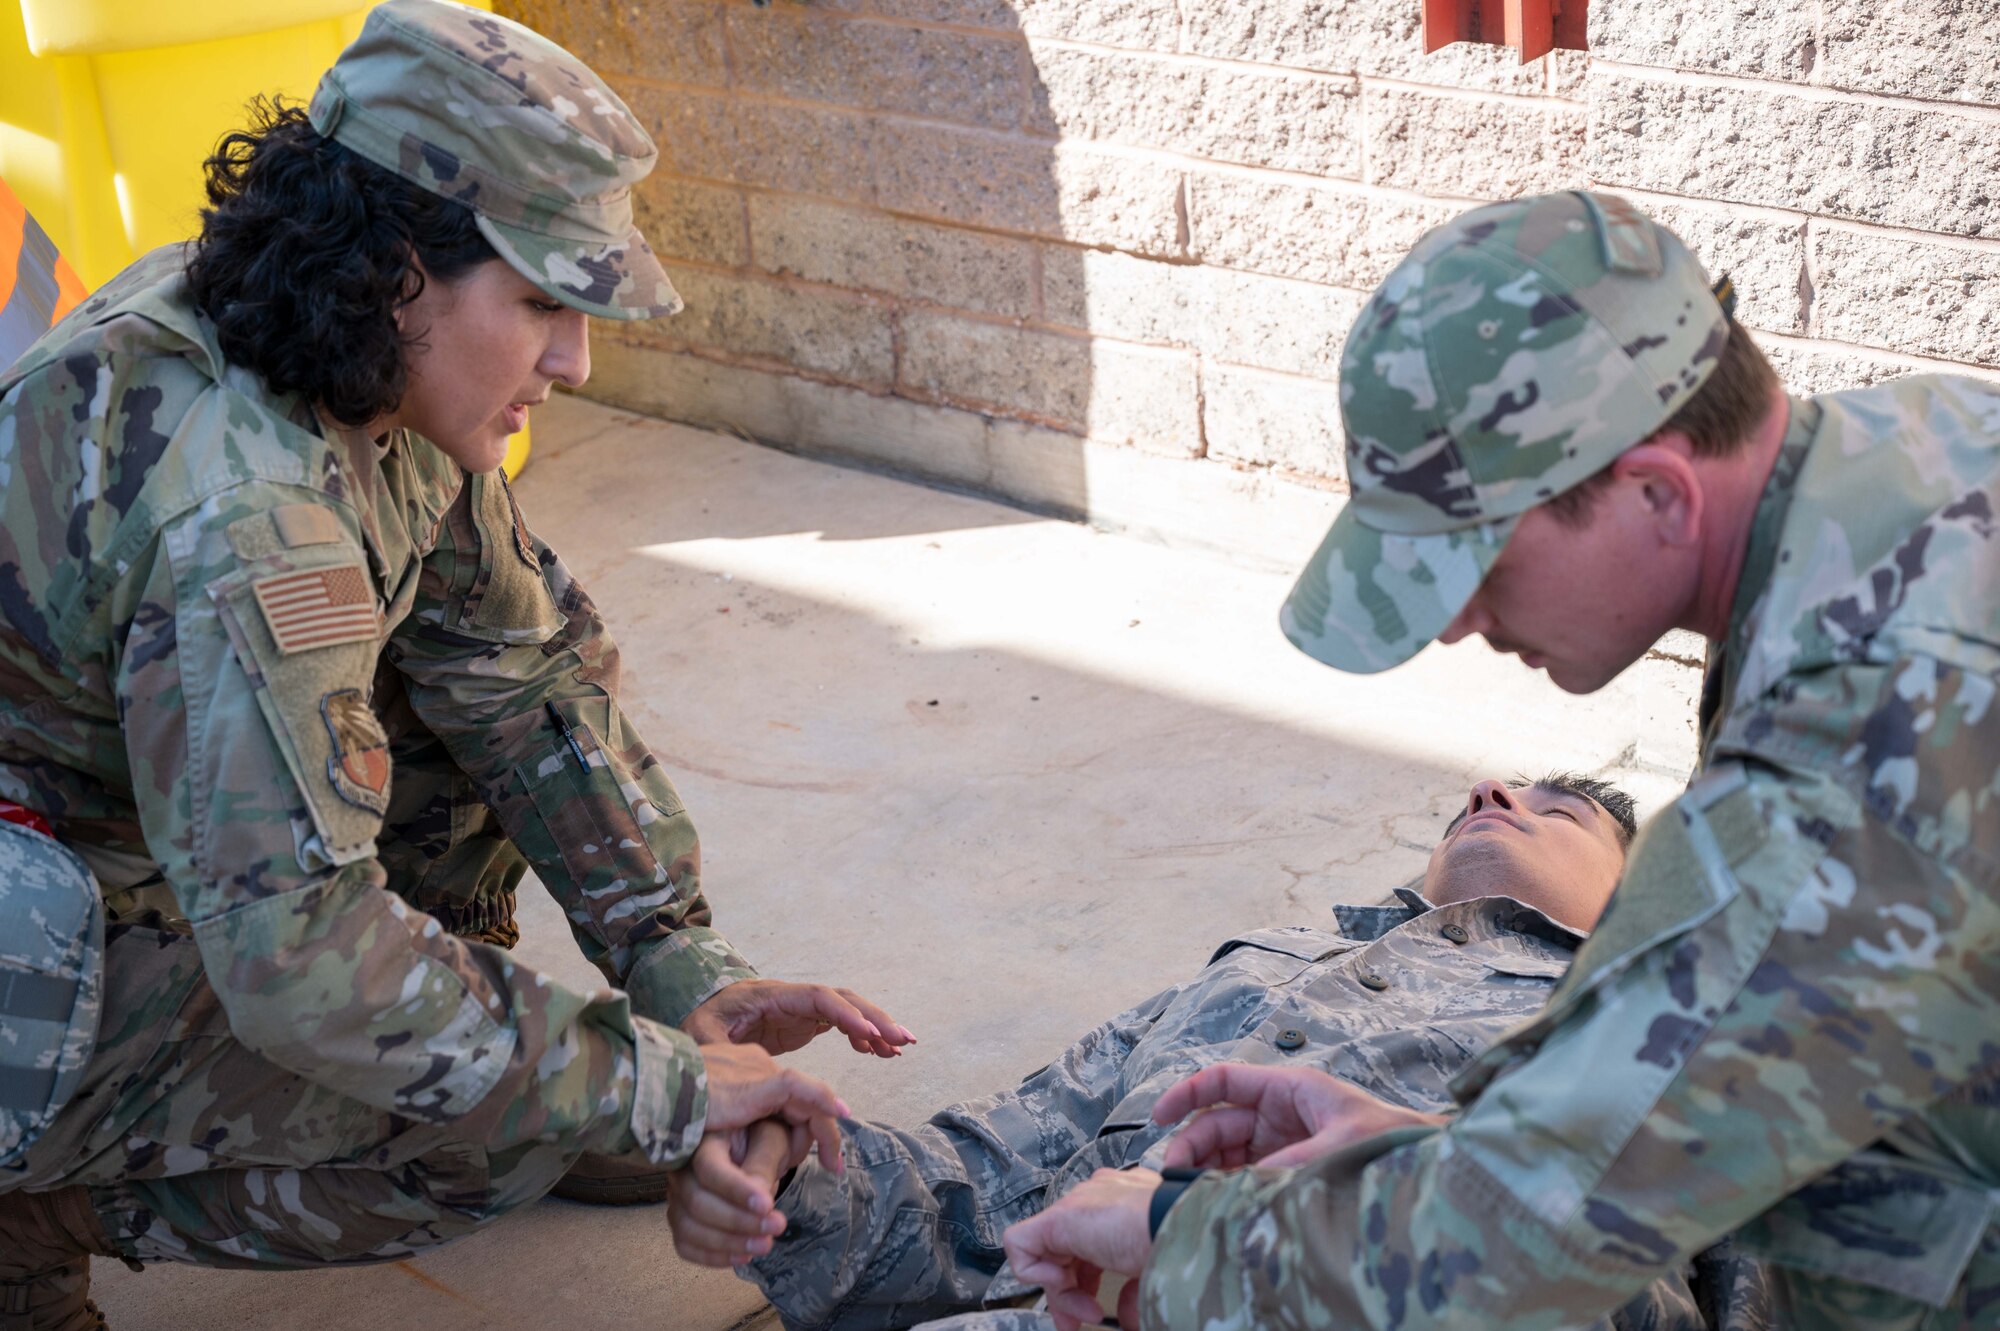 Students from the 4-day Tactical Combat Casualty Care (TCCC) and Combat LifeSaver (CLS) courses taught by 162nd Medical Group personnel practice on patients with simulated injuries during an “active shooter” exercise at Morris Air National Guard Base here today.